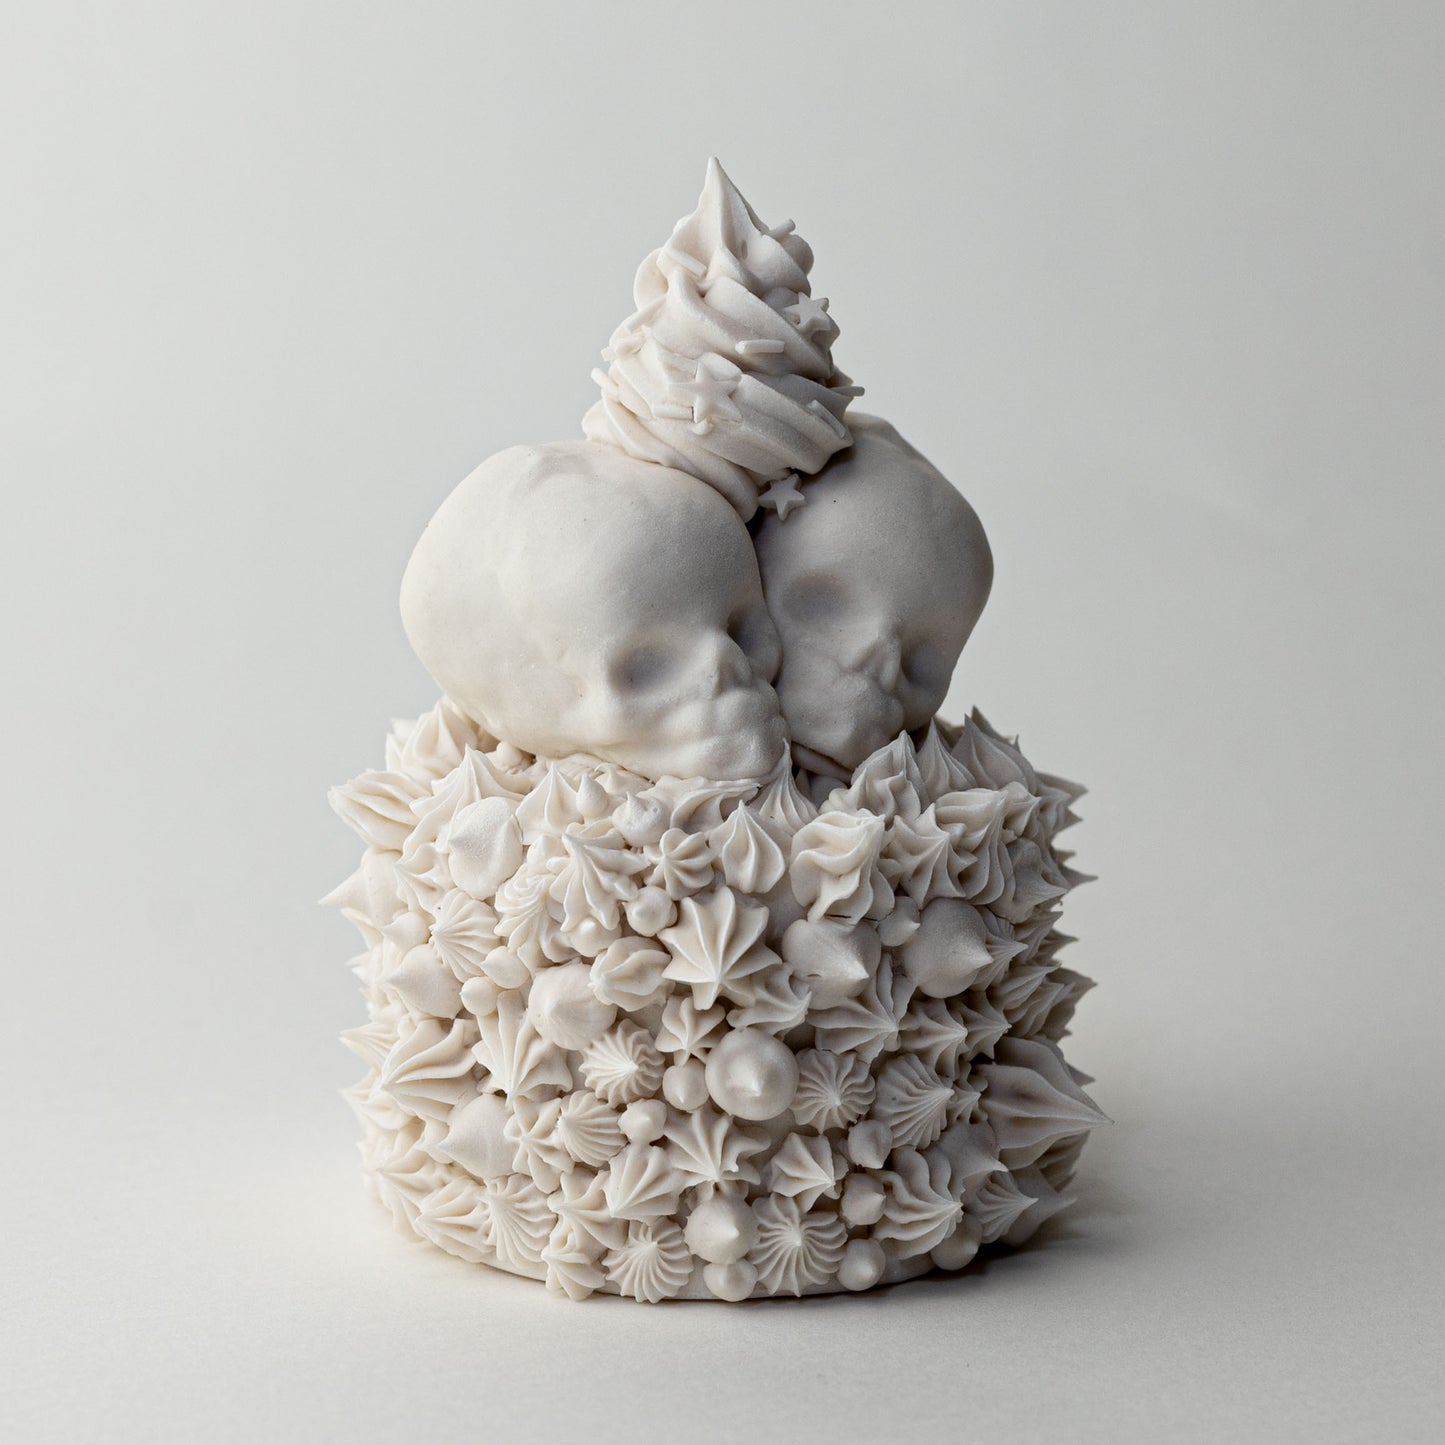 Swirl Twin Cake (One of a Kind Porcelain Sculpture)